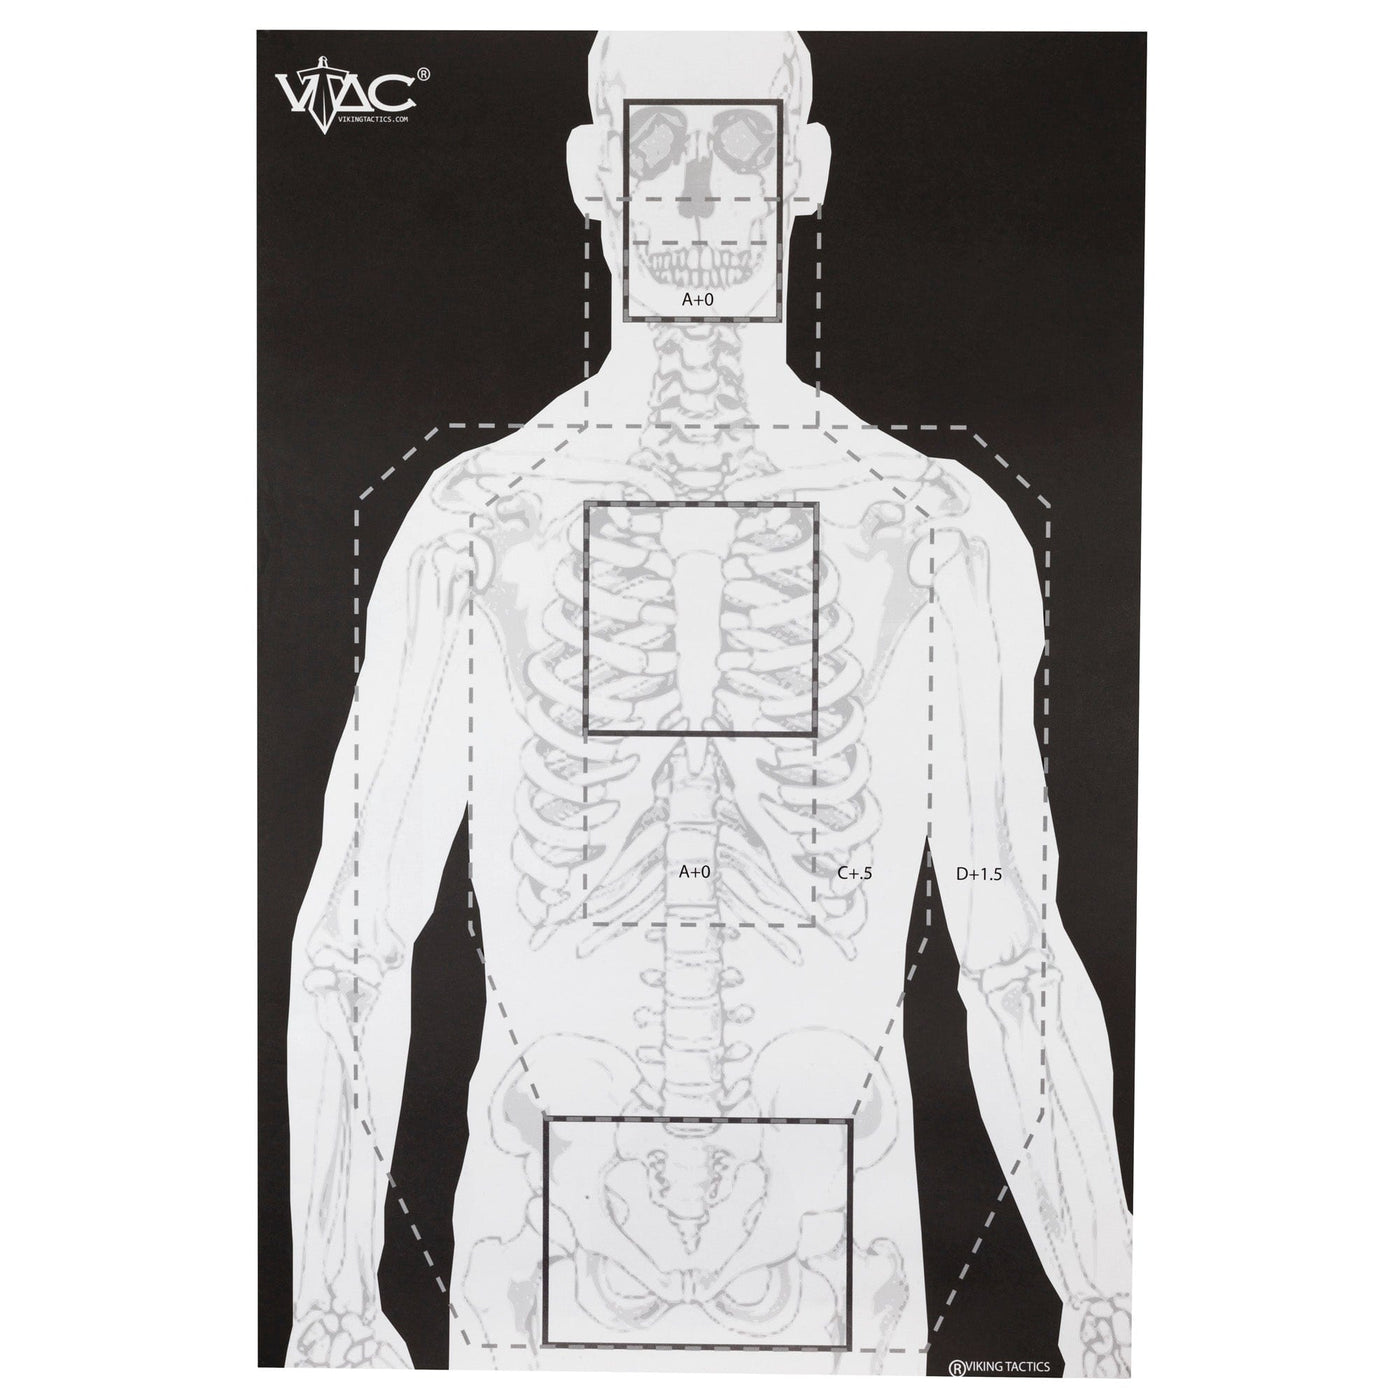 Action Target Action Target Sighting Advanced Training Marksmanship/Silhouette Heavy Paper 23" x 35" Black/Gray/White 100 Per Box; VTACP100 Targets